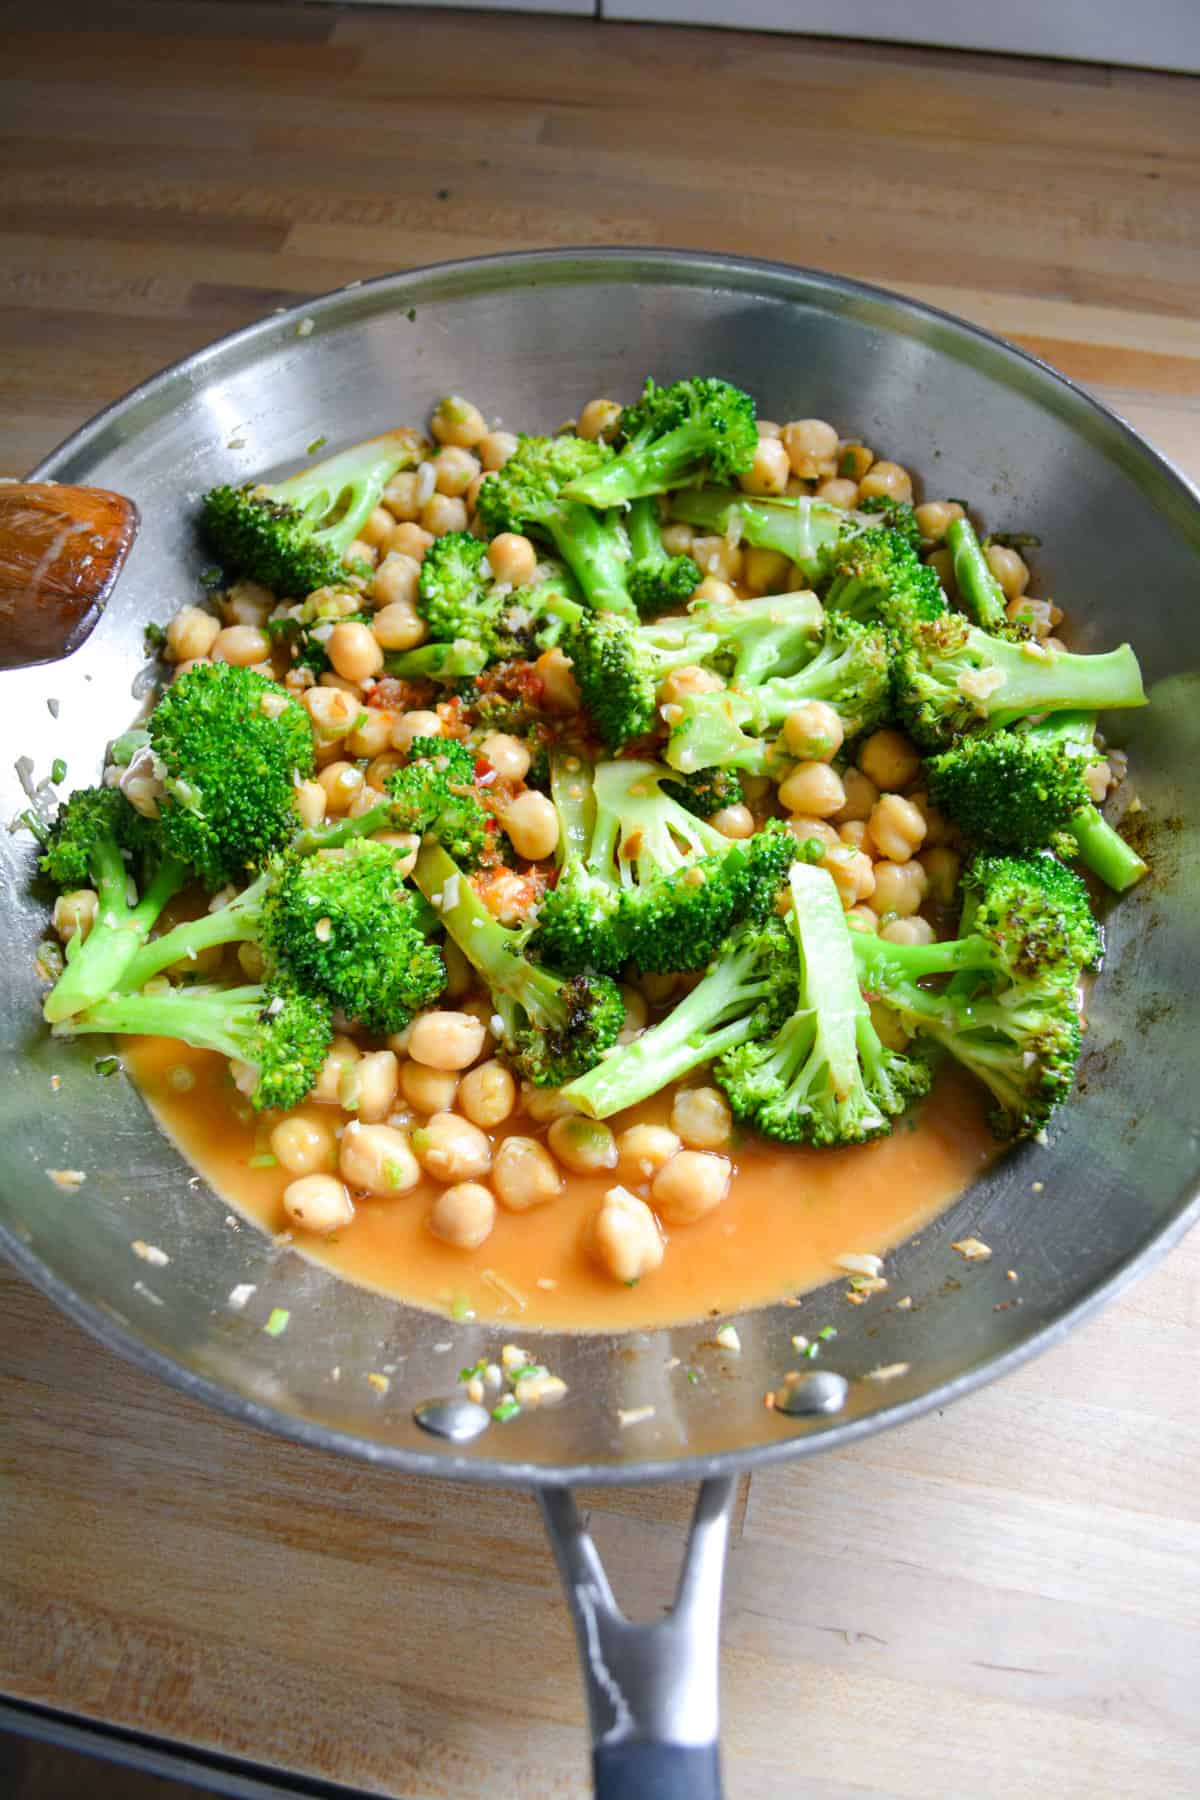 Chickpeas an stir fry sauce added to the skillet with the broccoli florets in it.